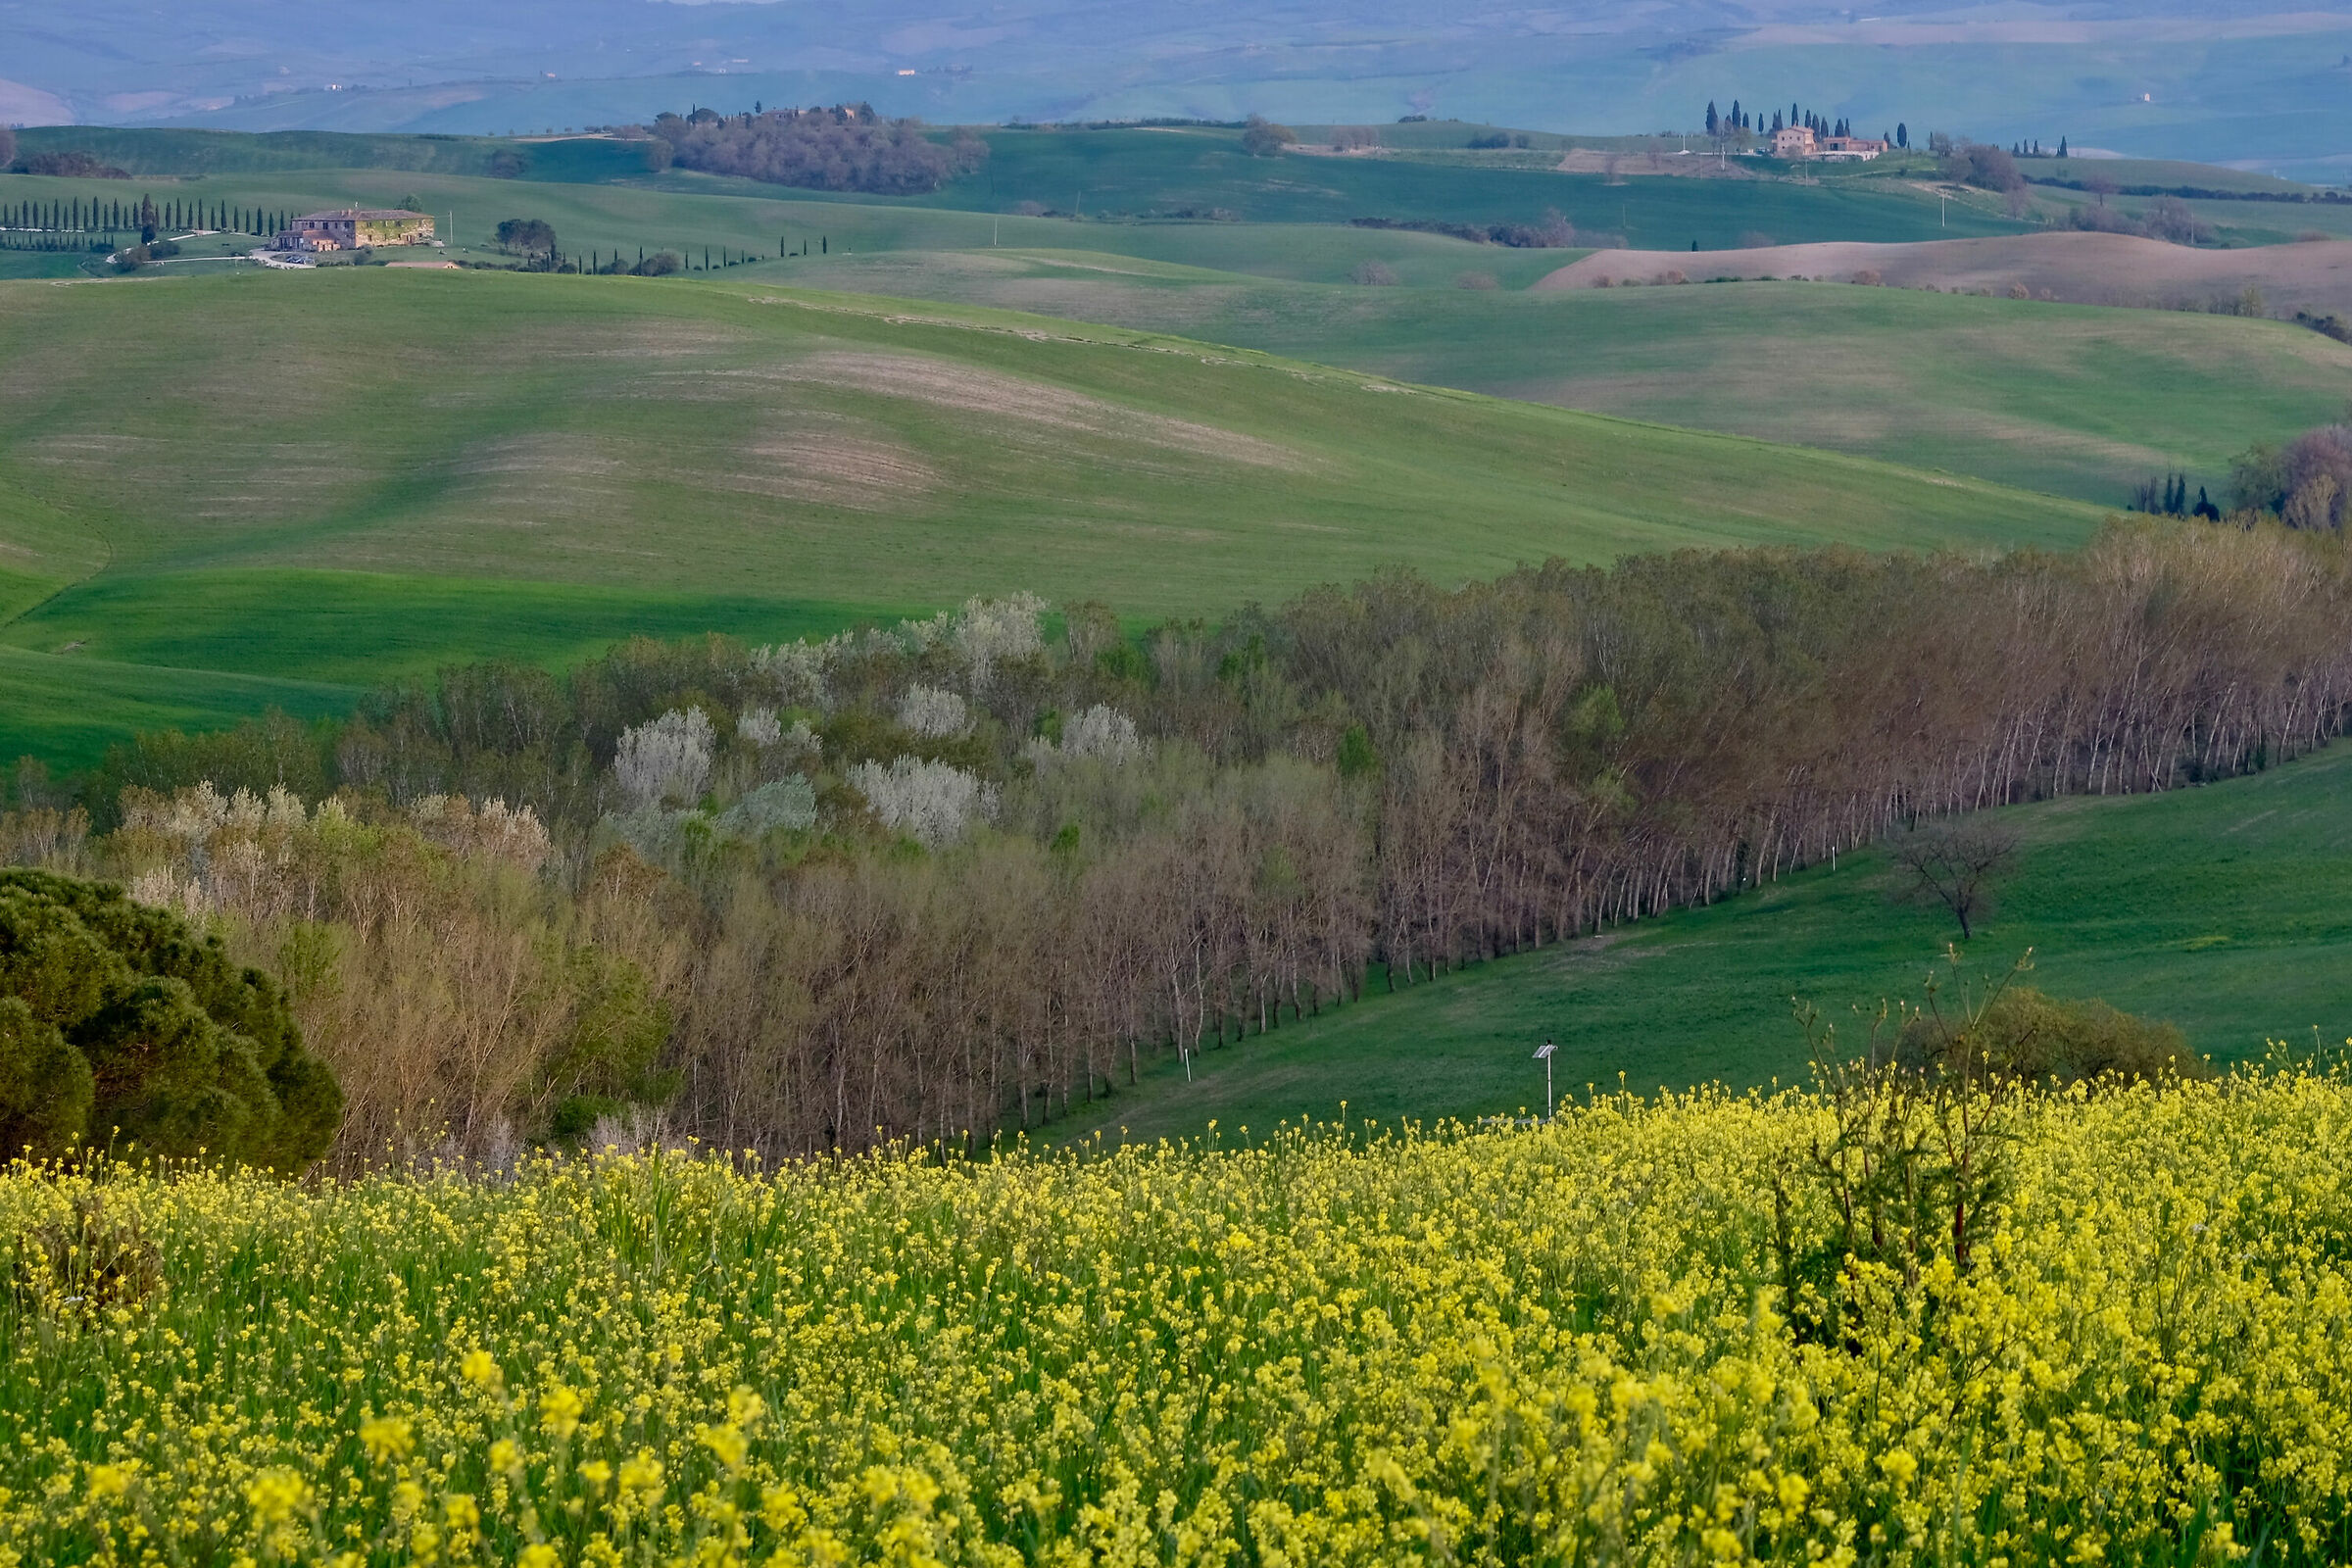 Down and up the Val d'orcia...